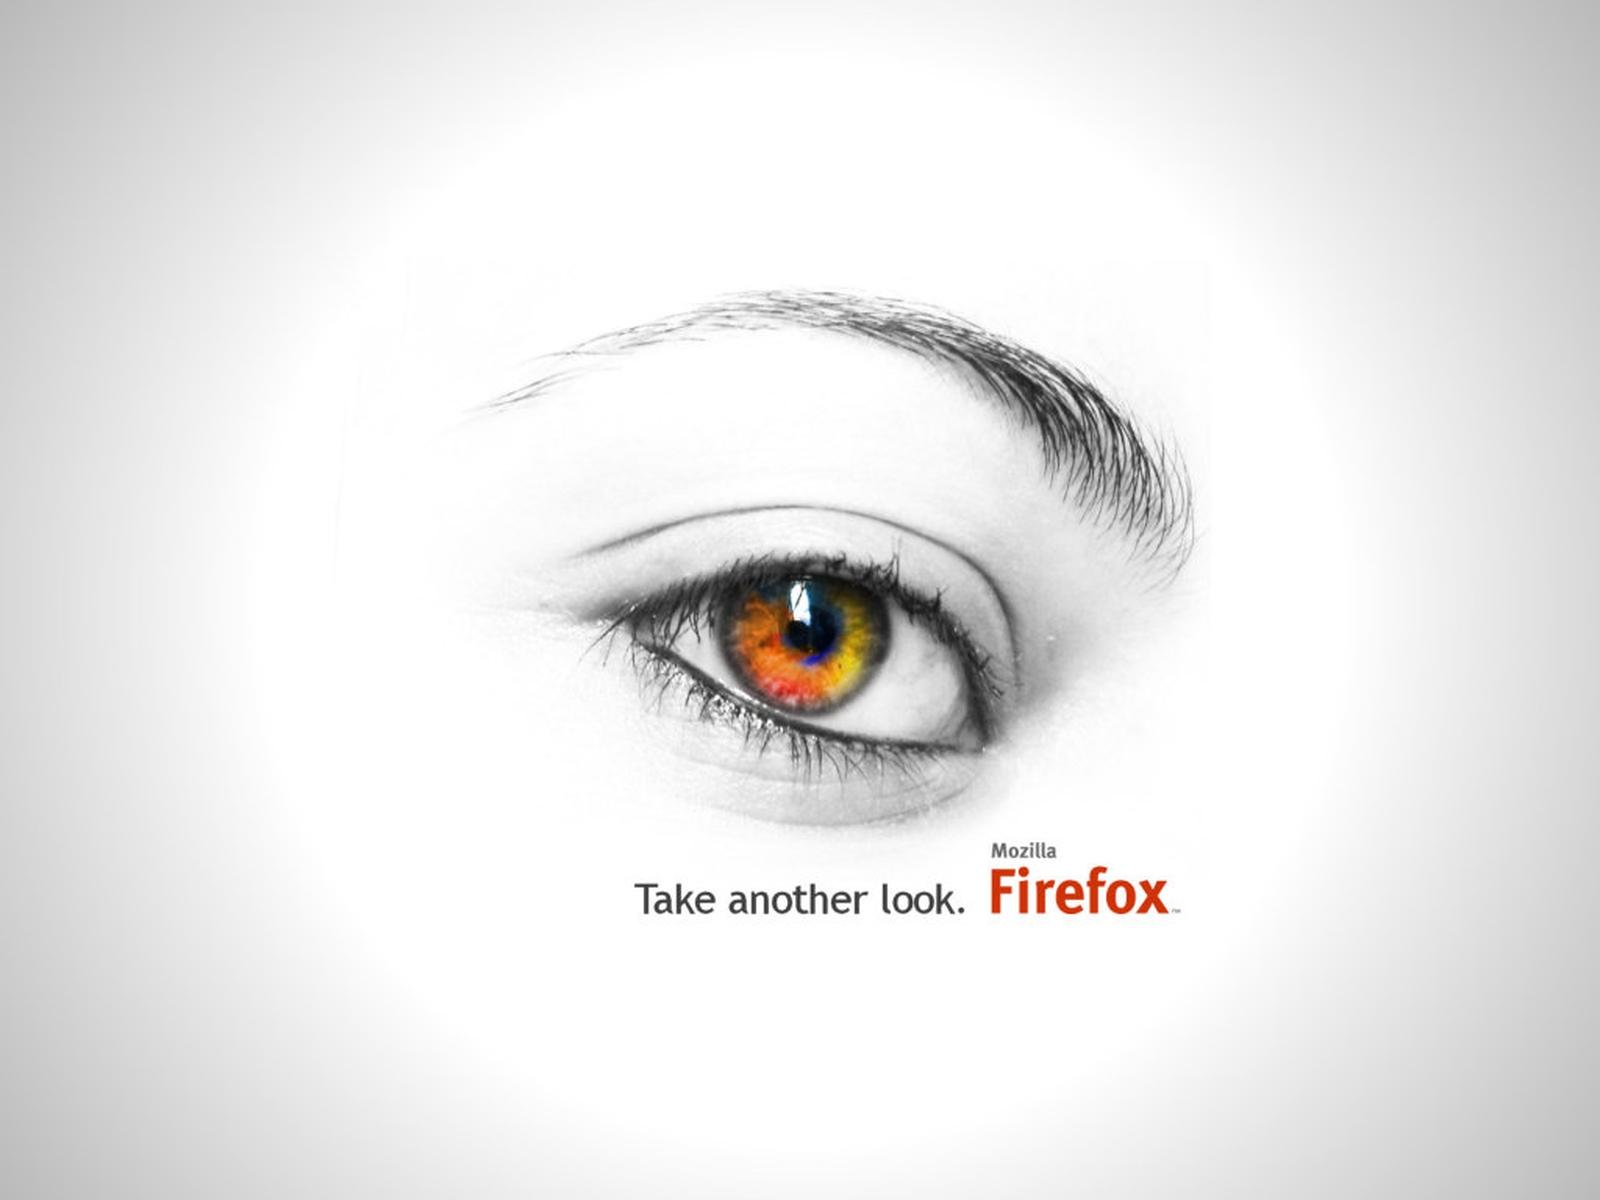 Firefox Took Another Look - Firefox Take Another Look - HD Wallpaper 